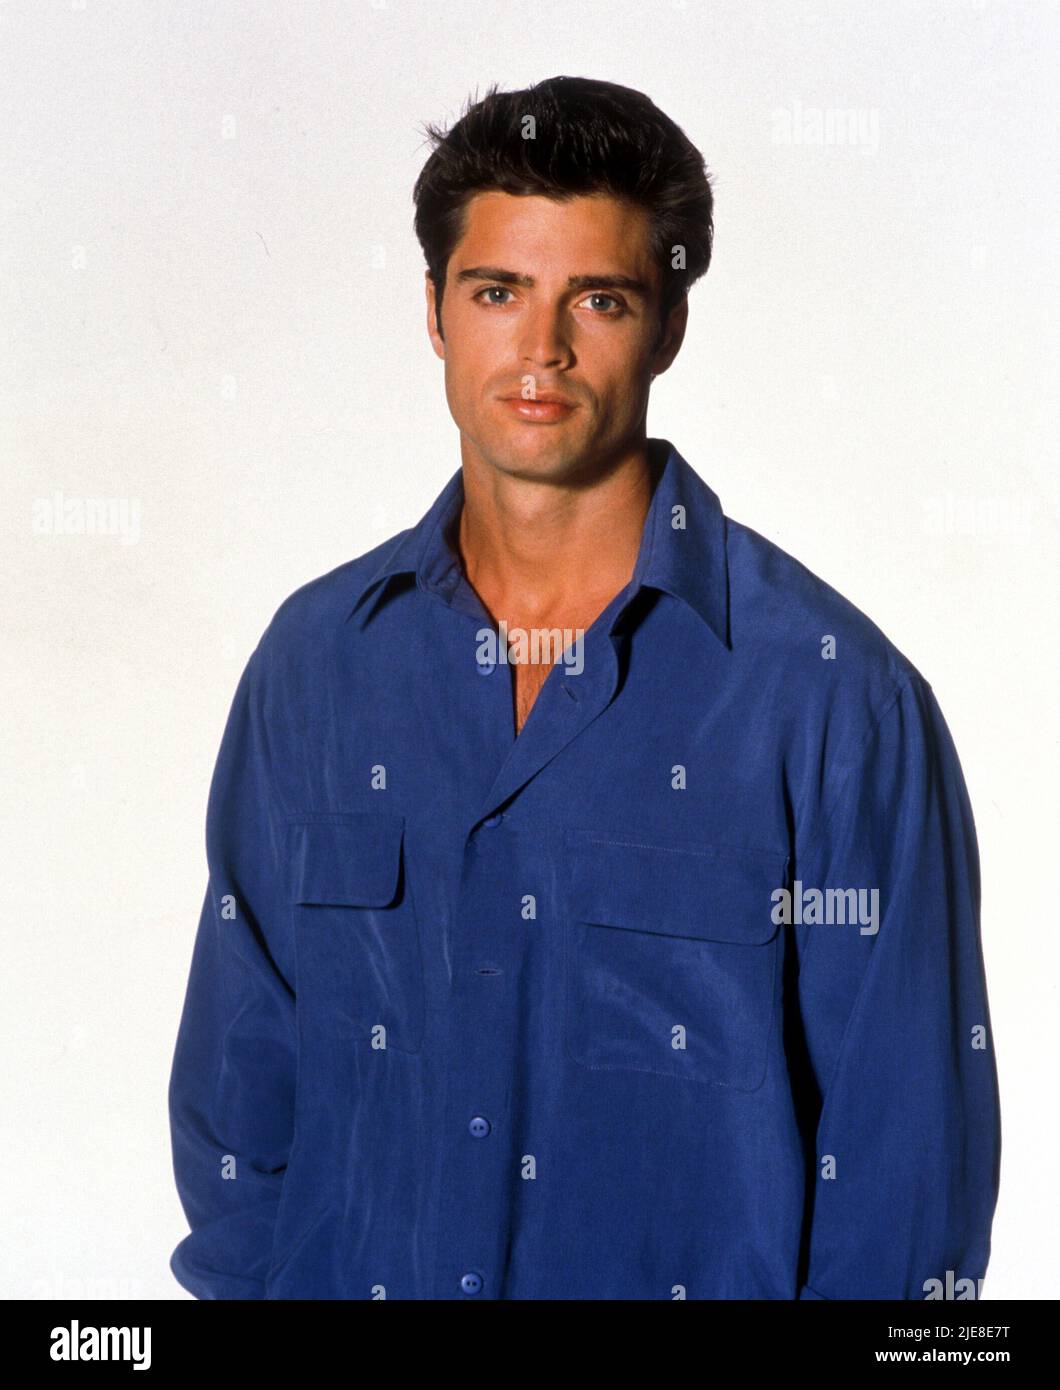 DAVID CHARVET in MELROSE PLACE (1992), directed by ANSON WILLIAMS, RICHARD LANG and CHARLES CORRELL. Credit: FOX TELEVISION NETWORK/SPELLING TELEVISION / Album Stock Photo